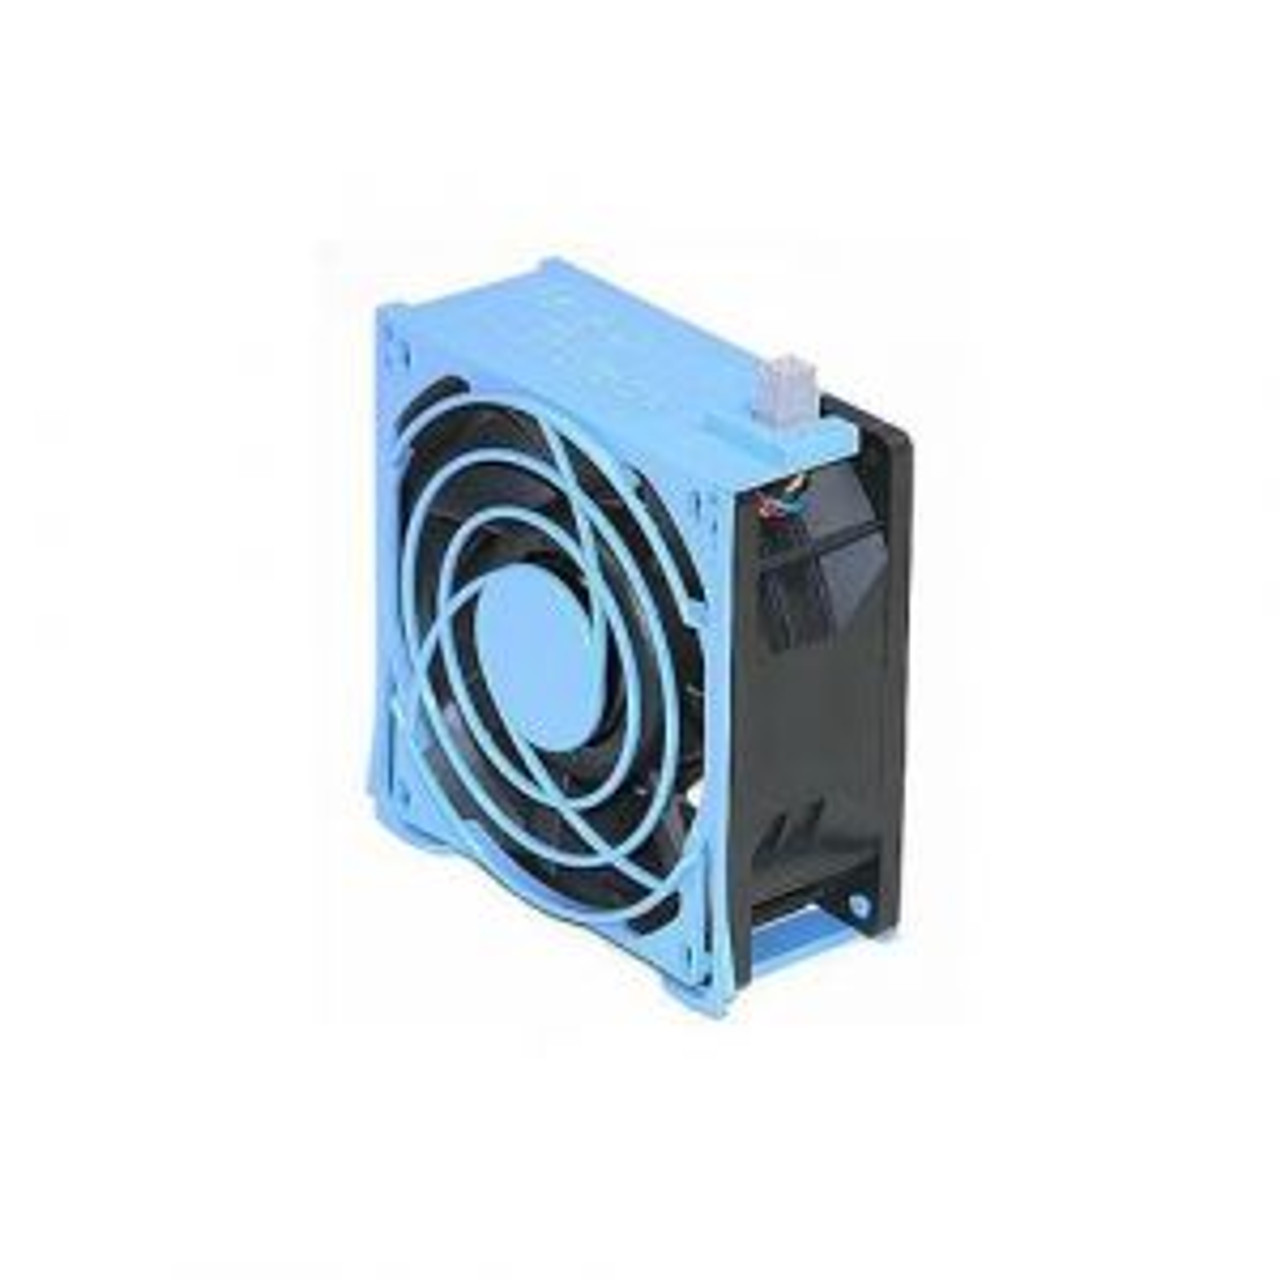 X2R7W Dell CPU Cooling Fan for Alienware 18 R1